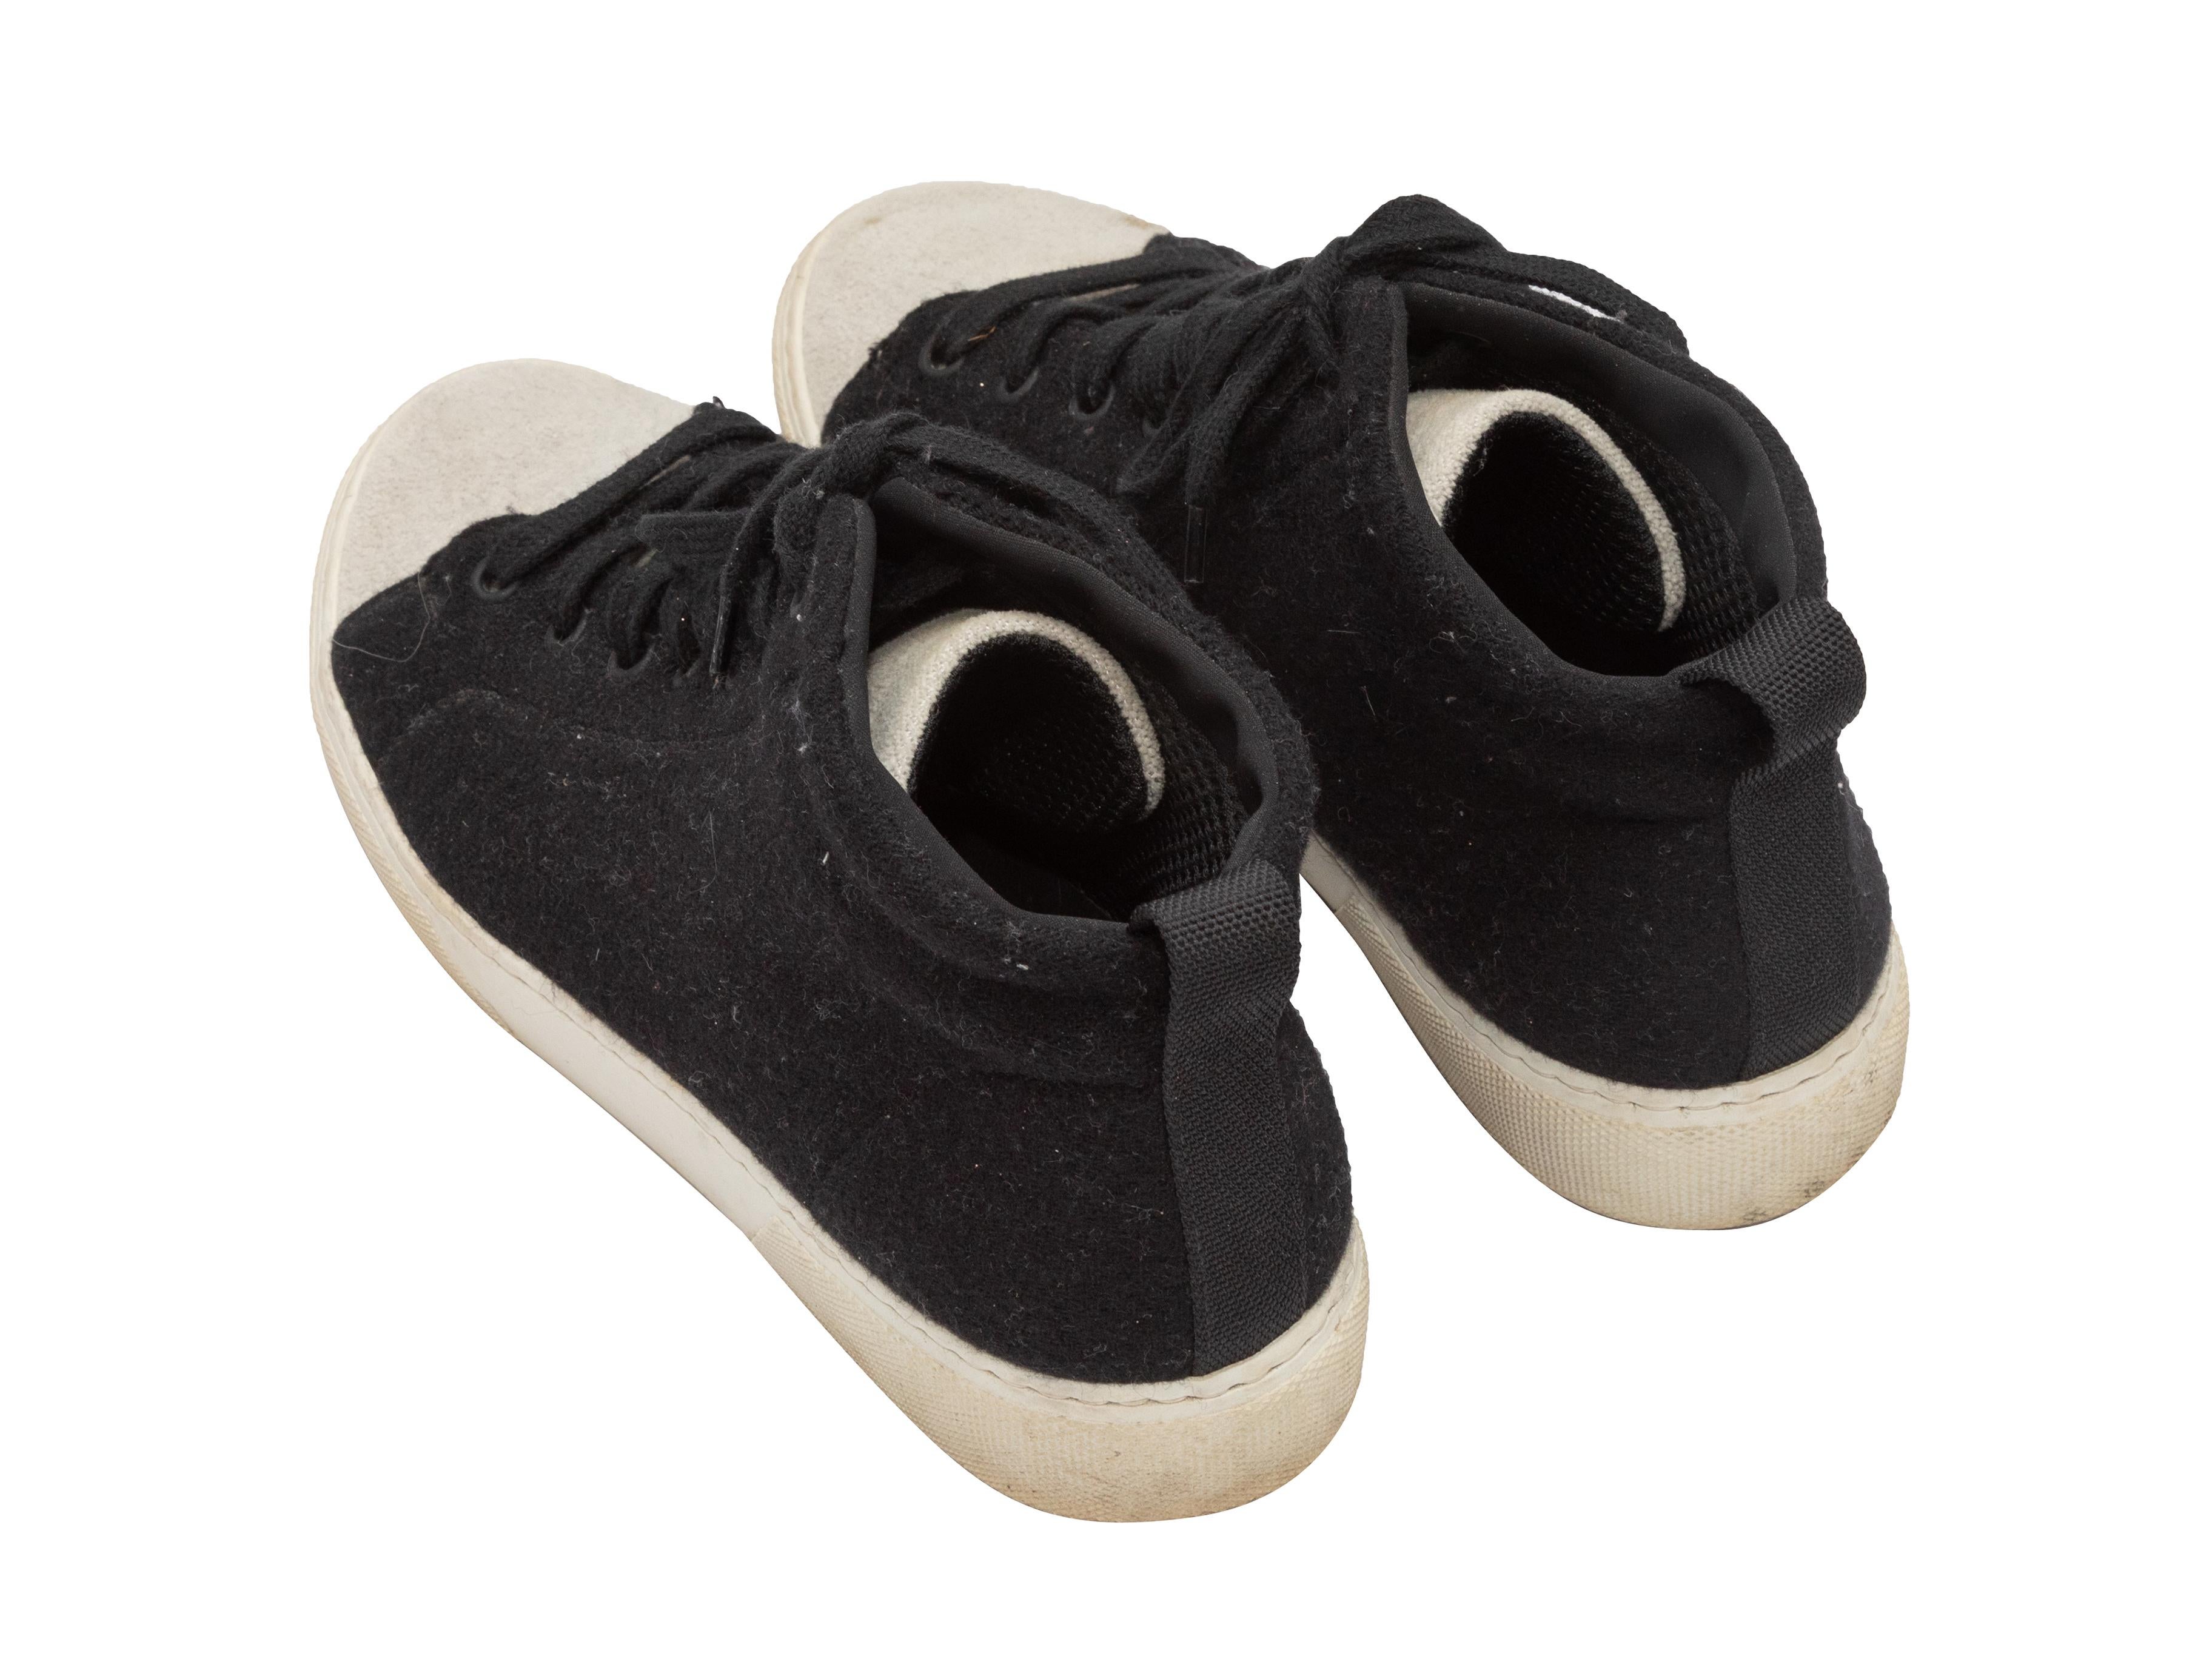 Black & White James Perse Wool High-Top Sneakers For Sale 1